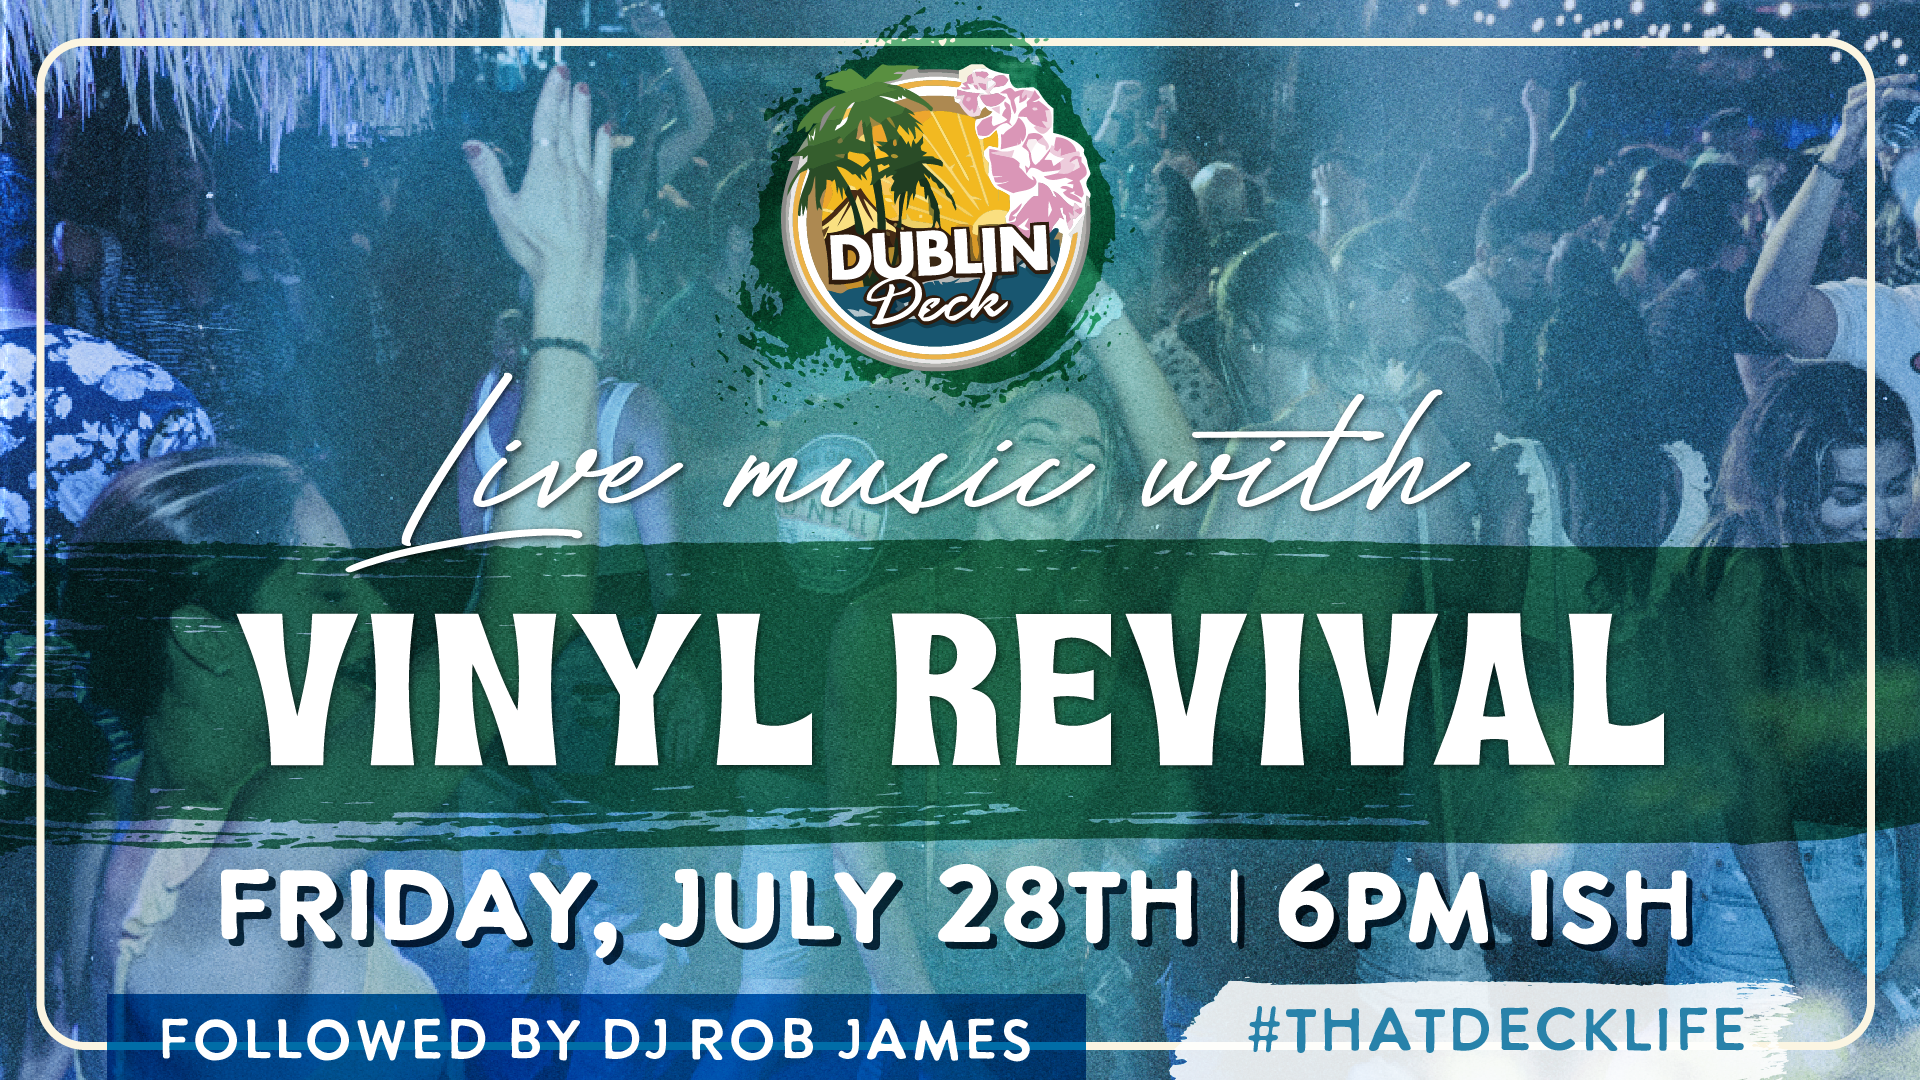 We're getting the weekend started with Vinyl Revival on stage at Dublin Deck! Music begins at 6PM-ish